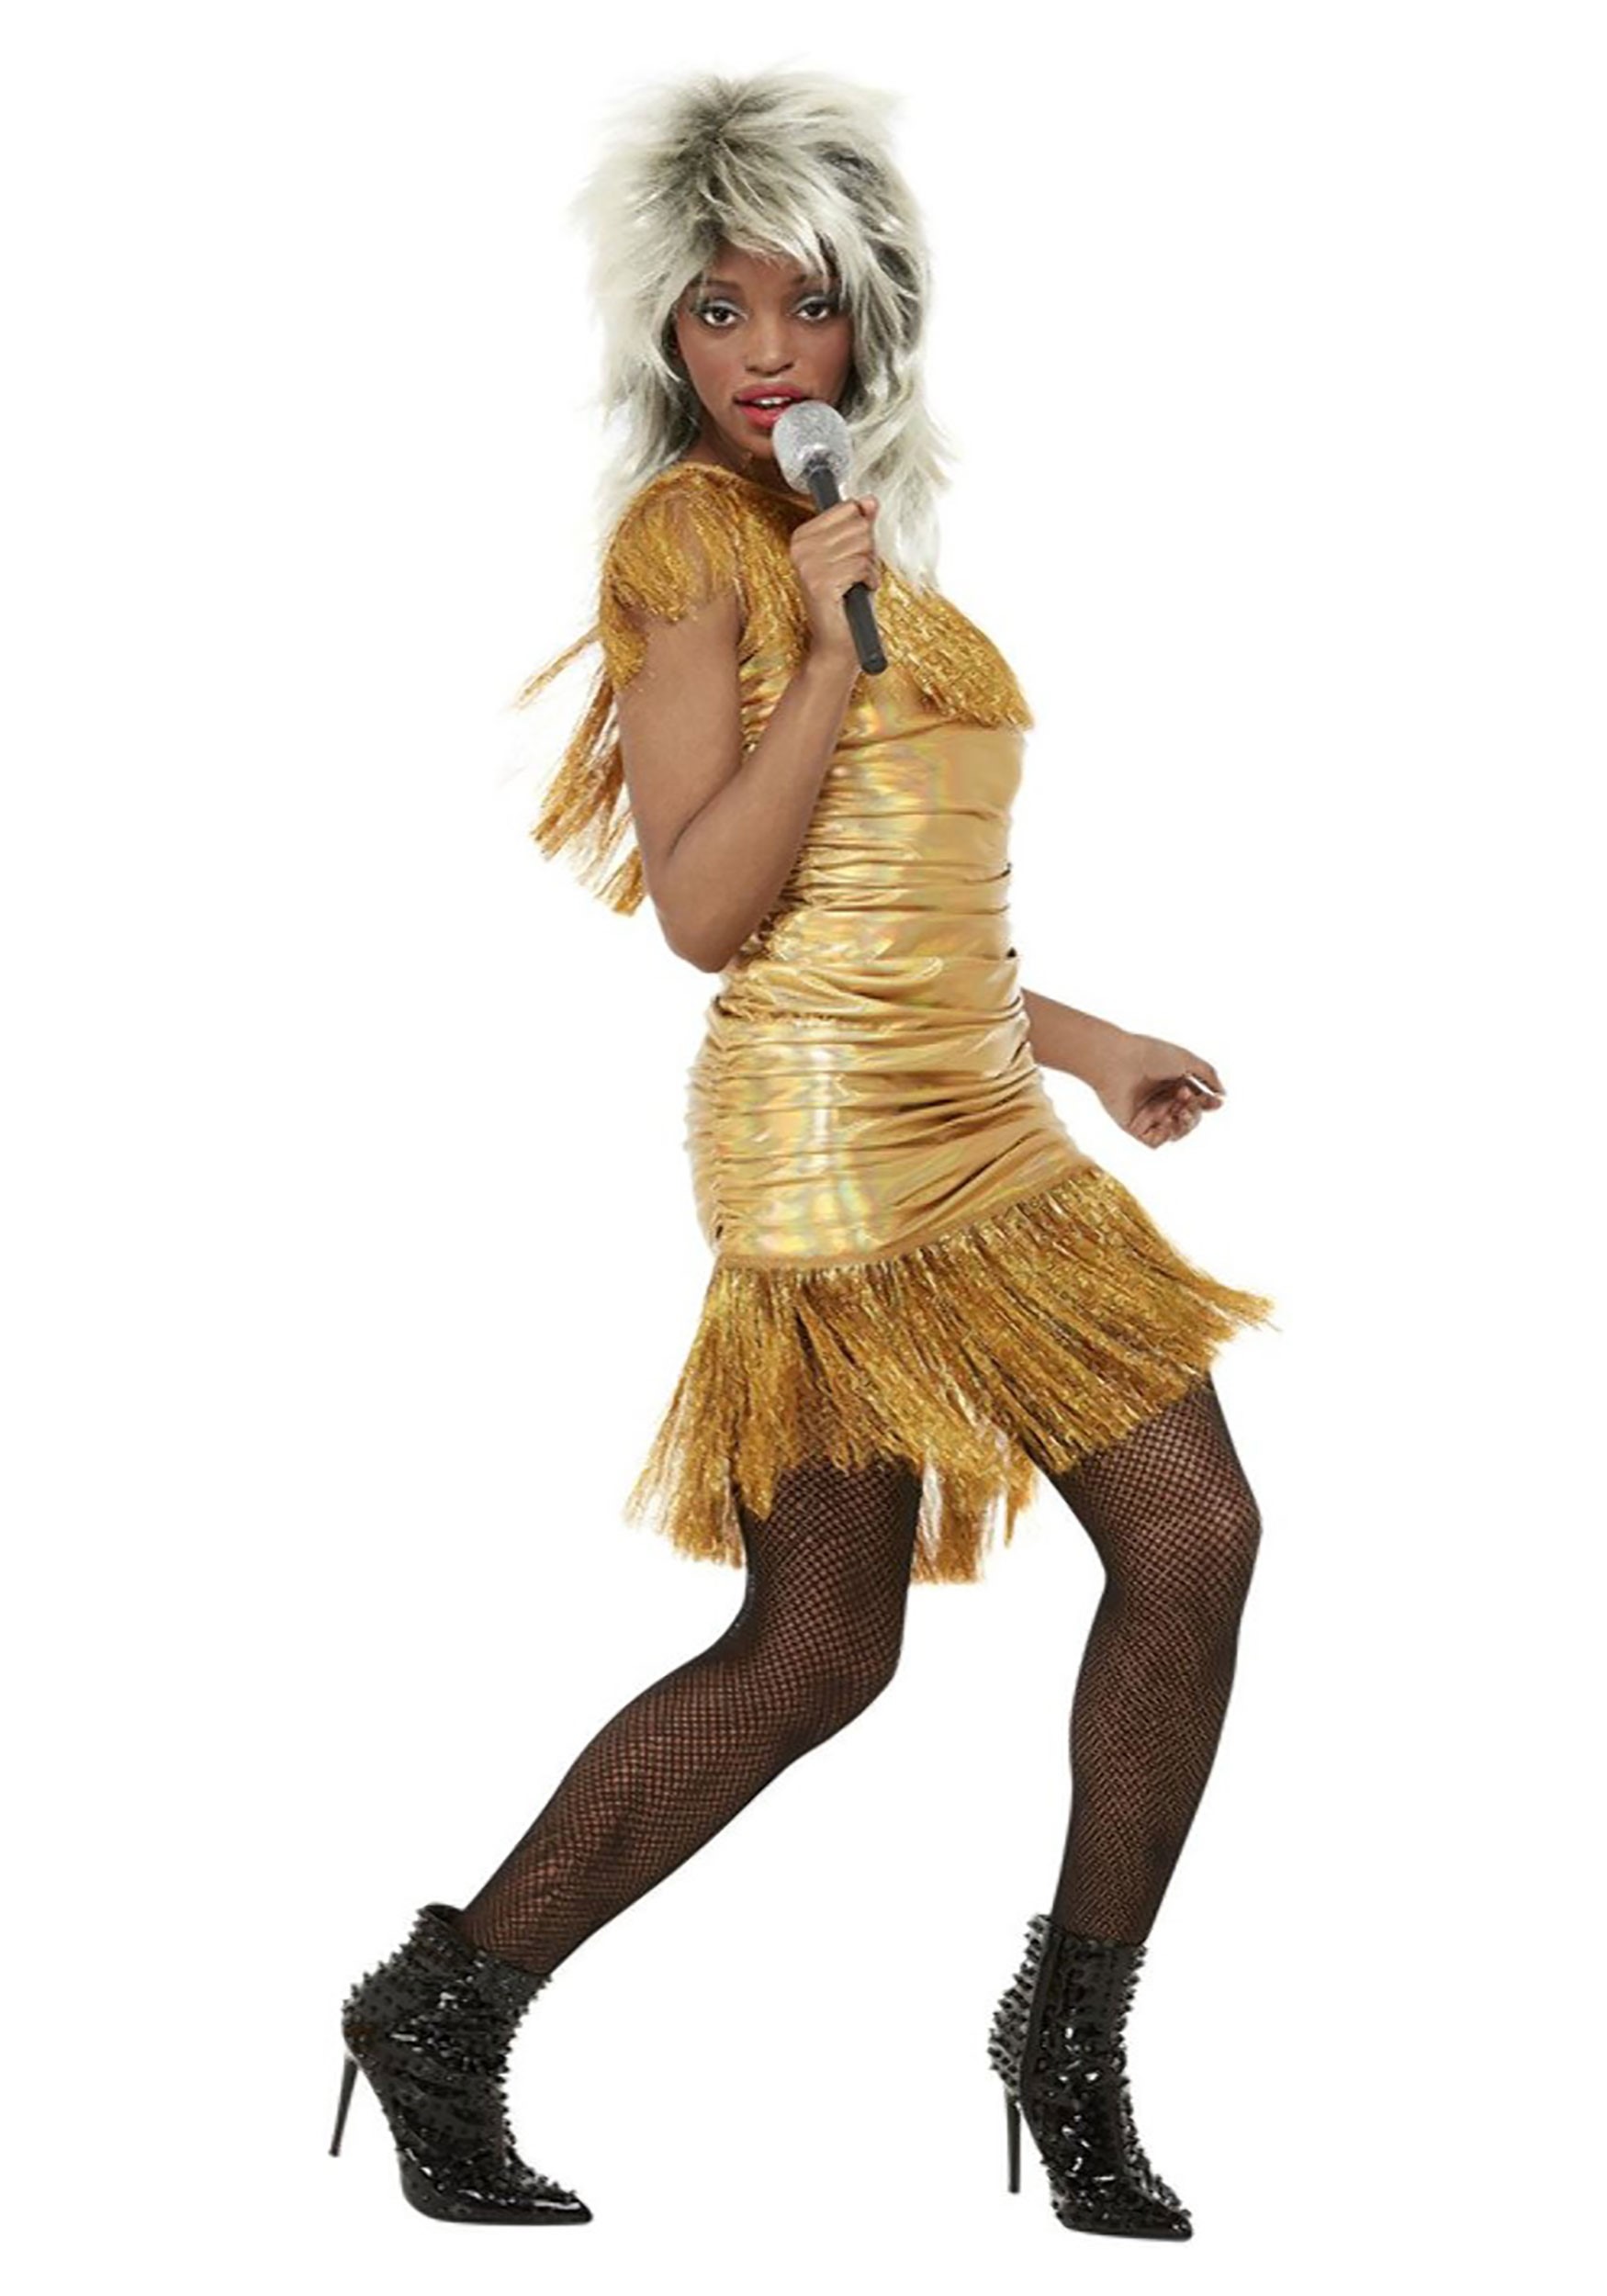 Simply The Best Tina Turner Costume for Women